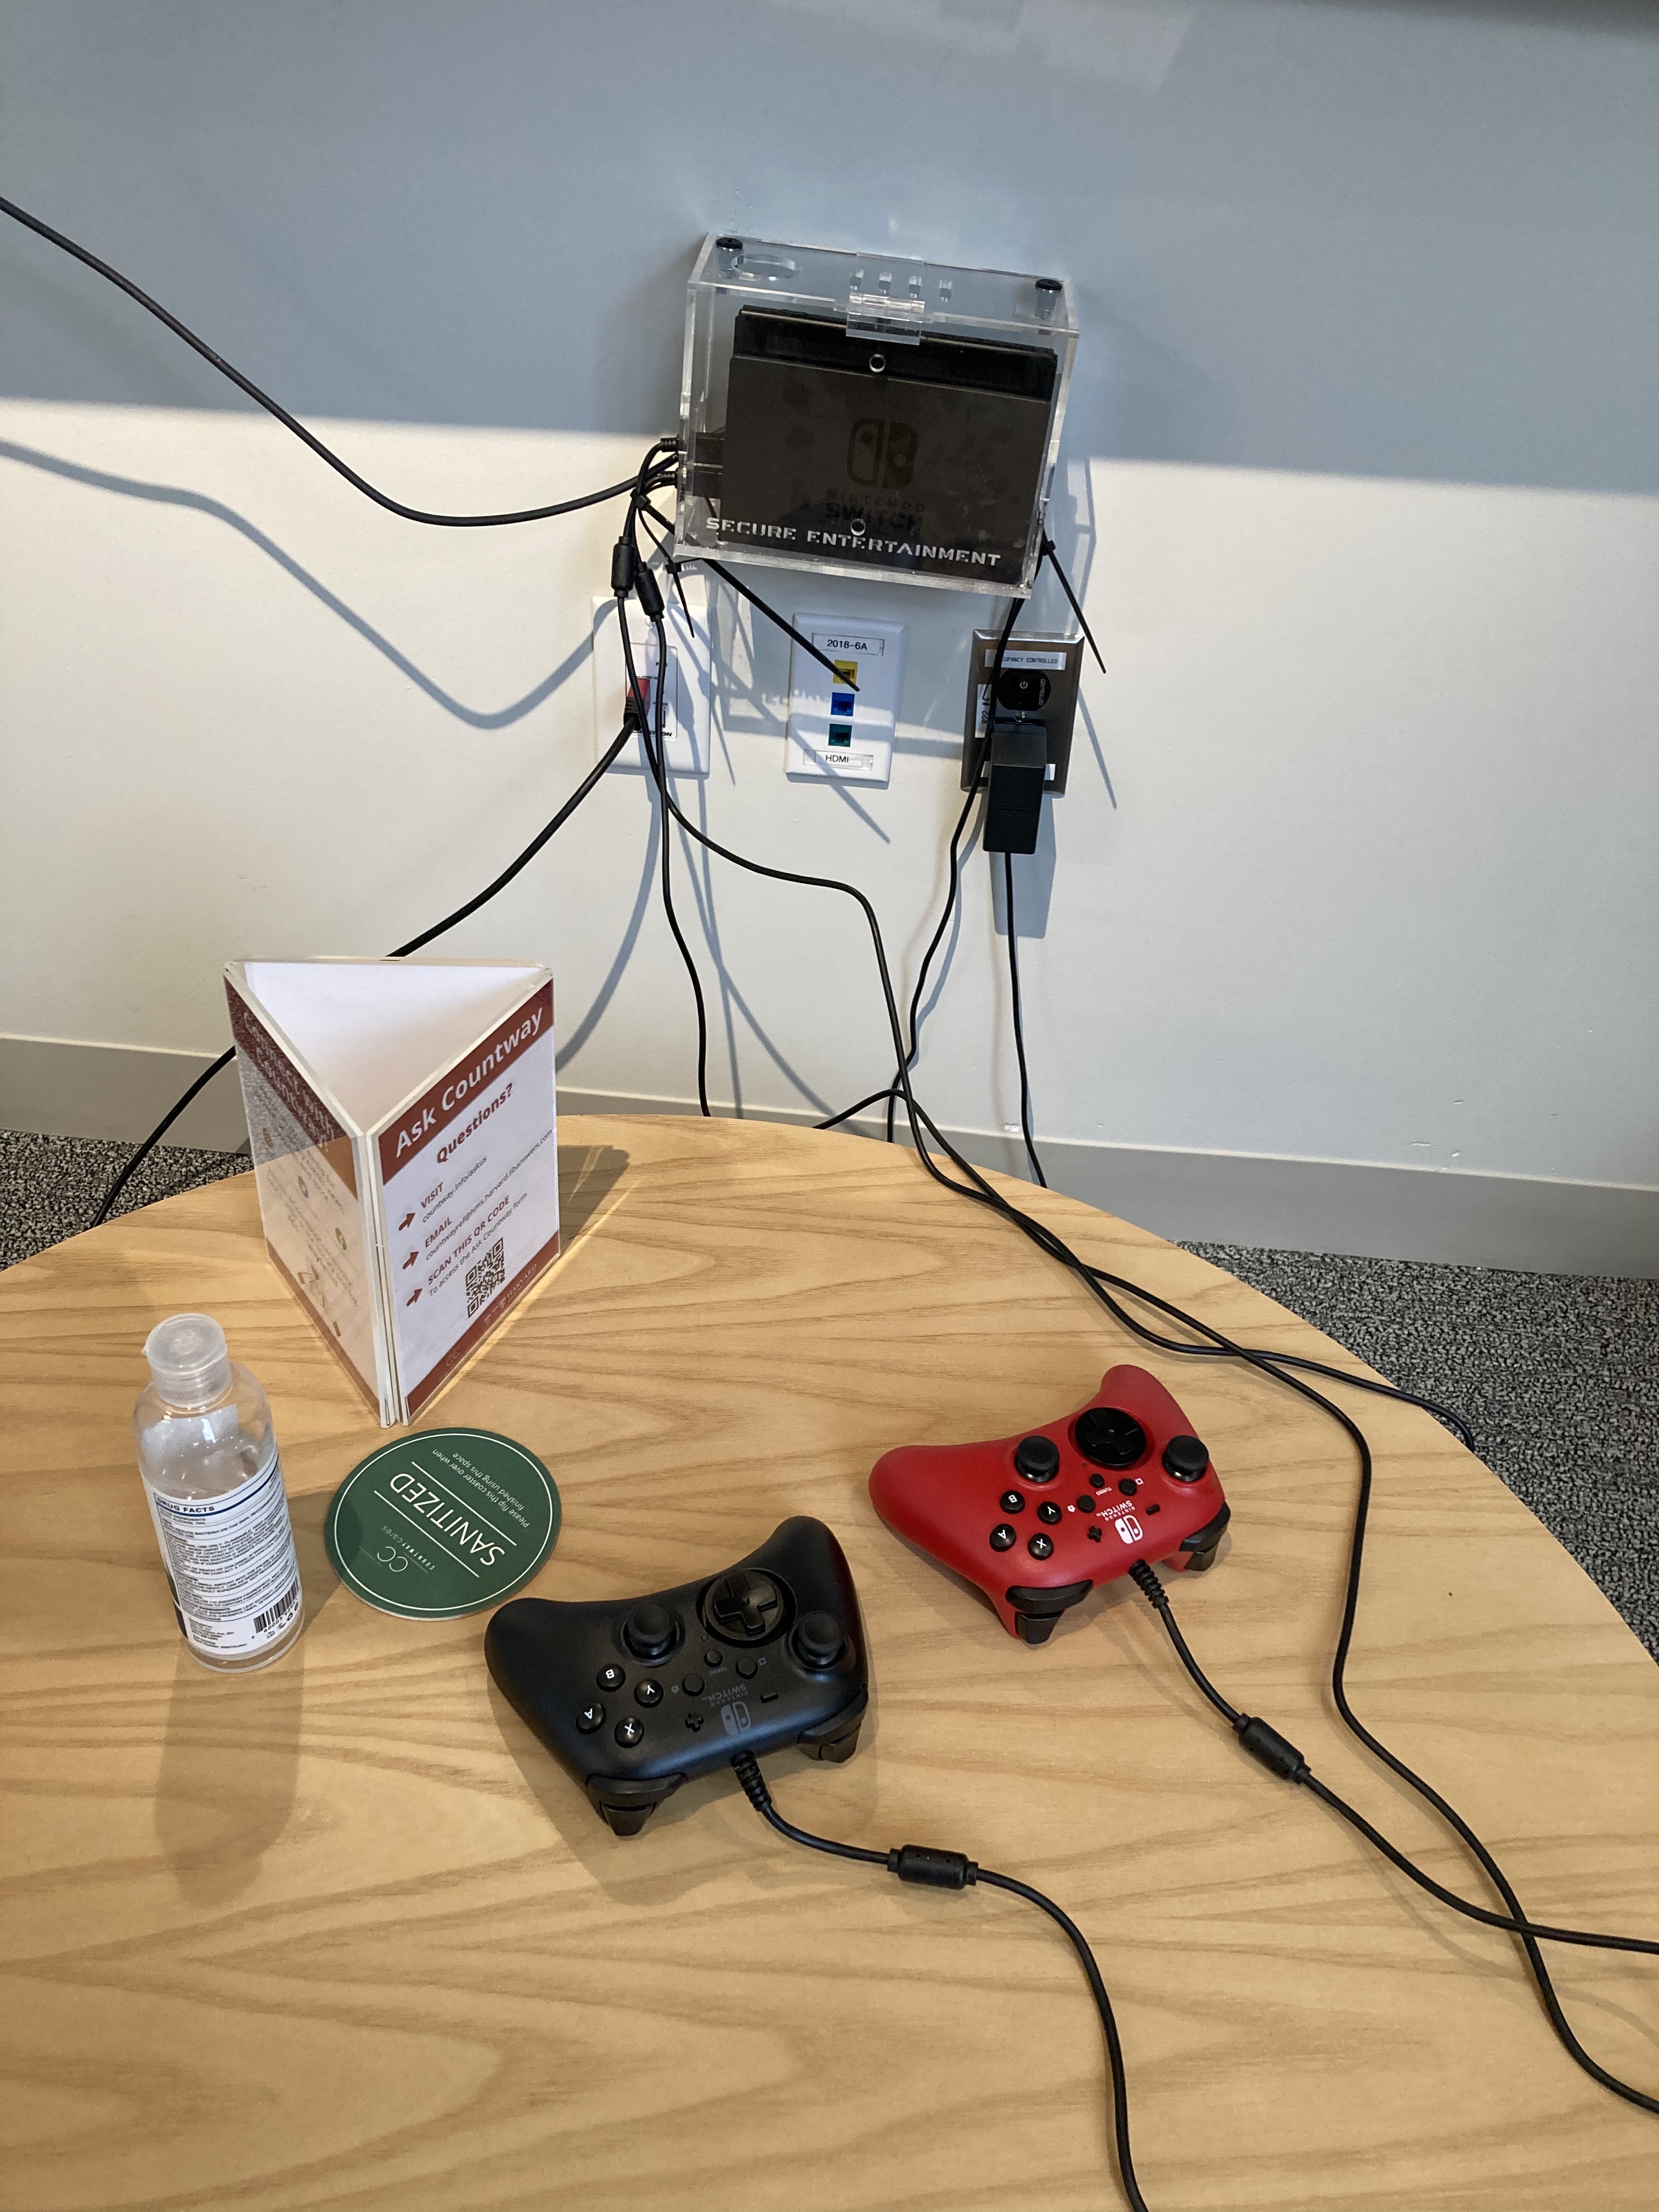 Nintendo Switch remote controls on a sanitized table next to a bottle of hand sanitizer